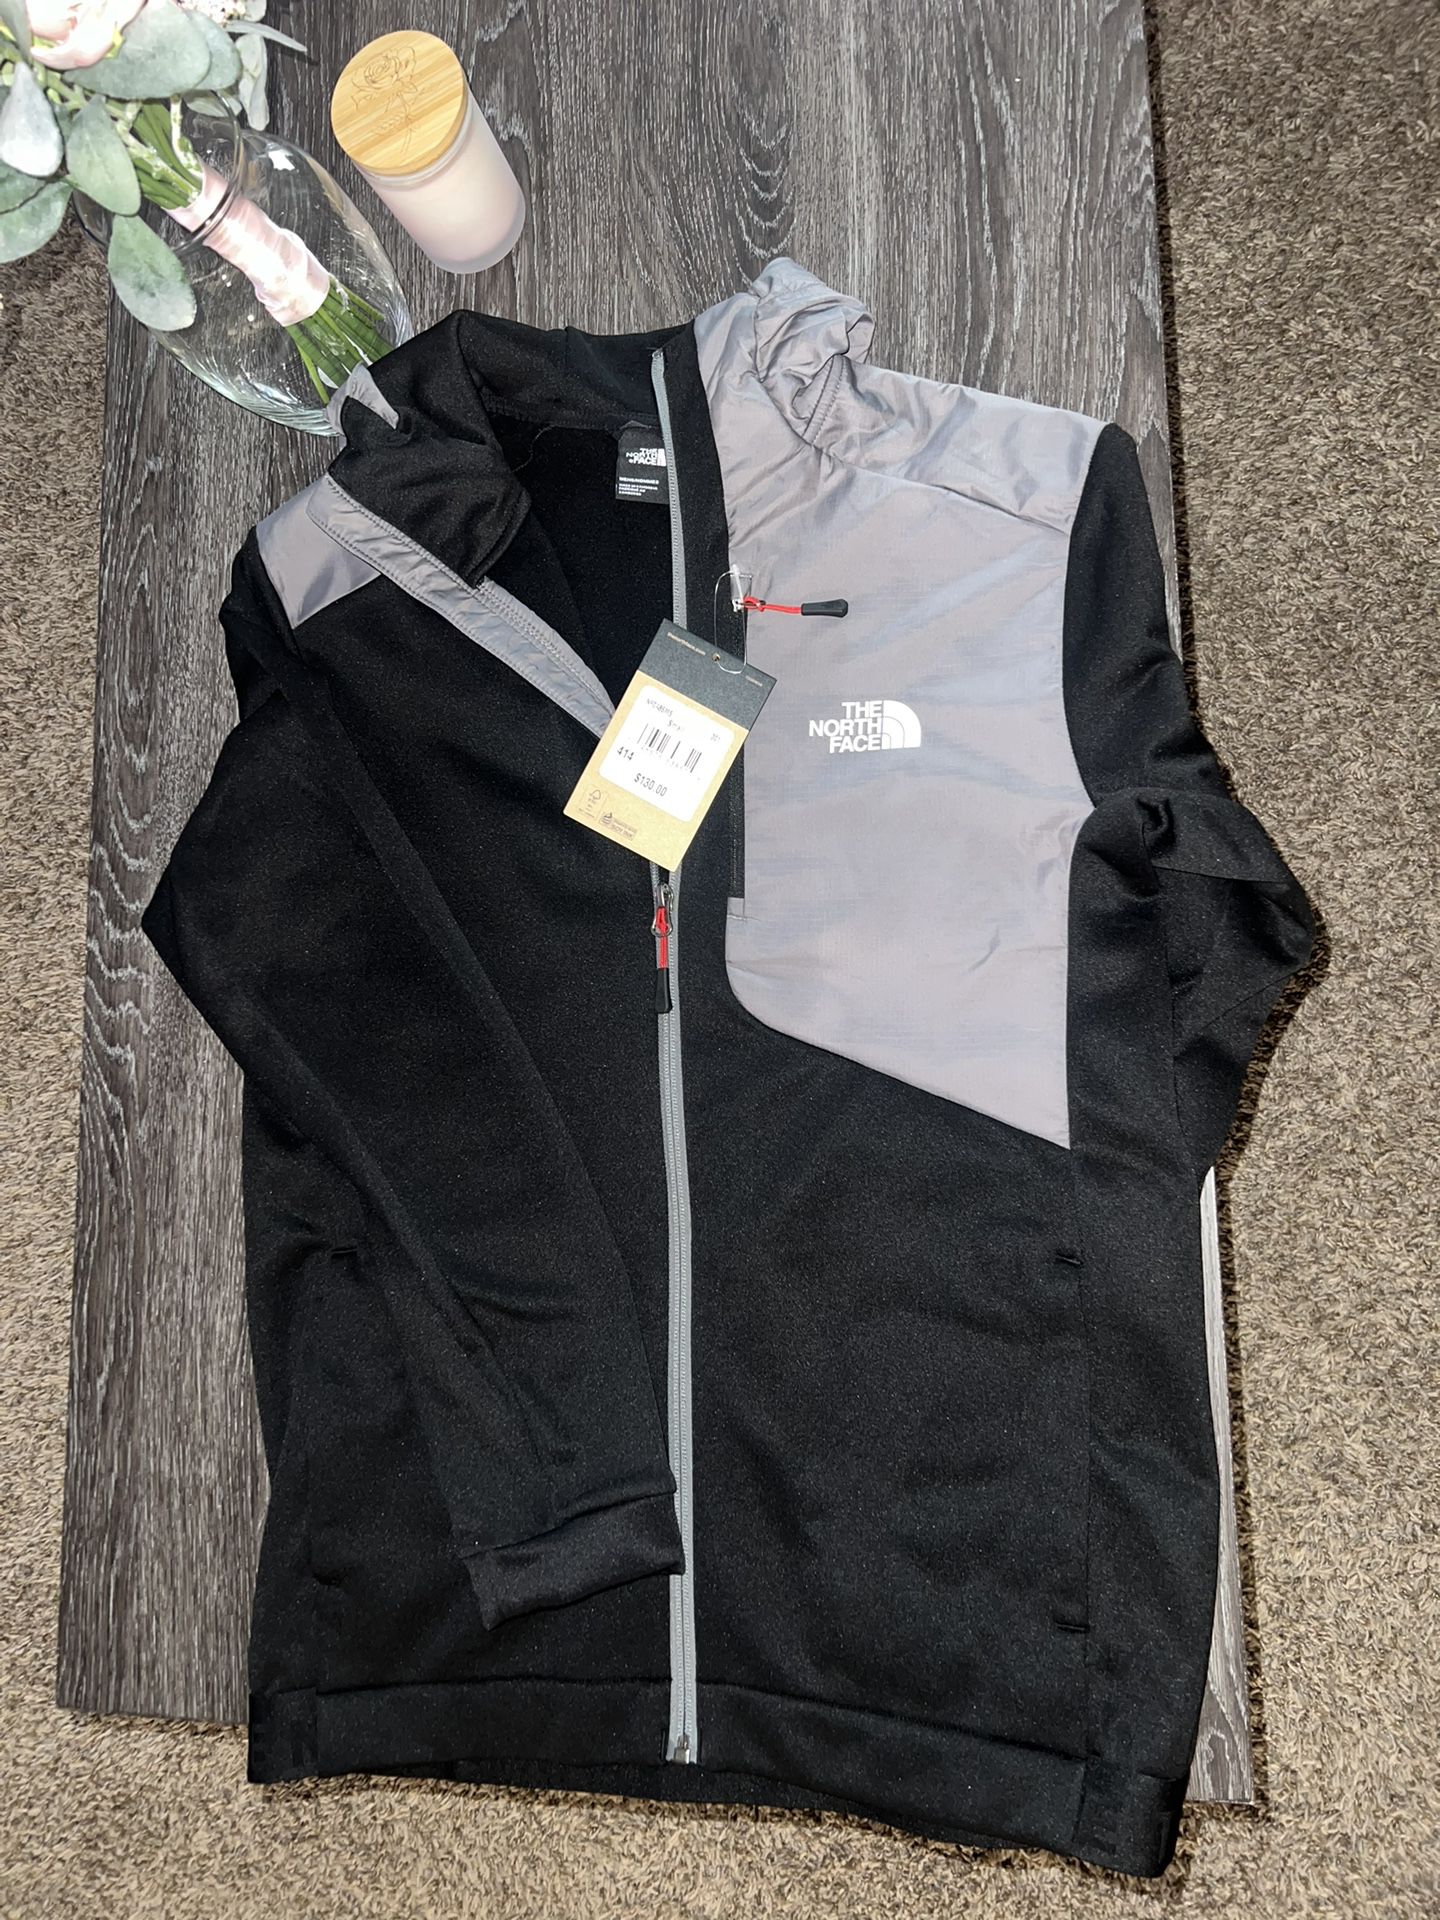 North face Size Small